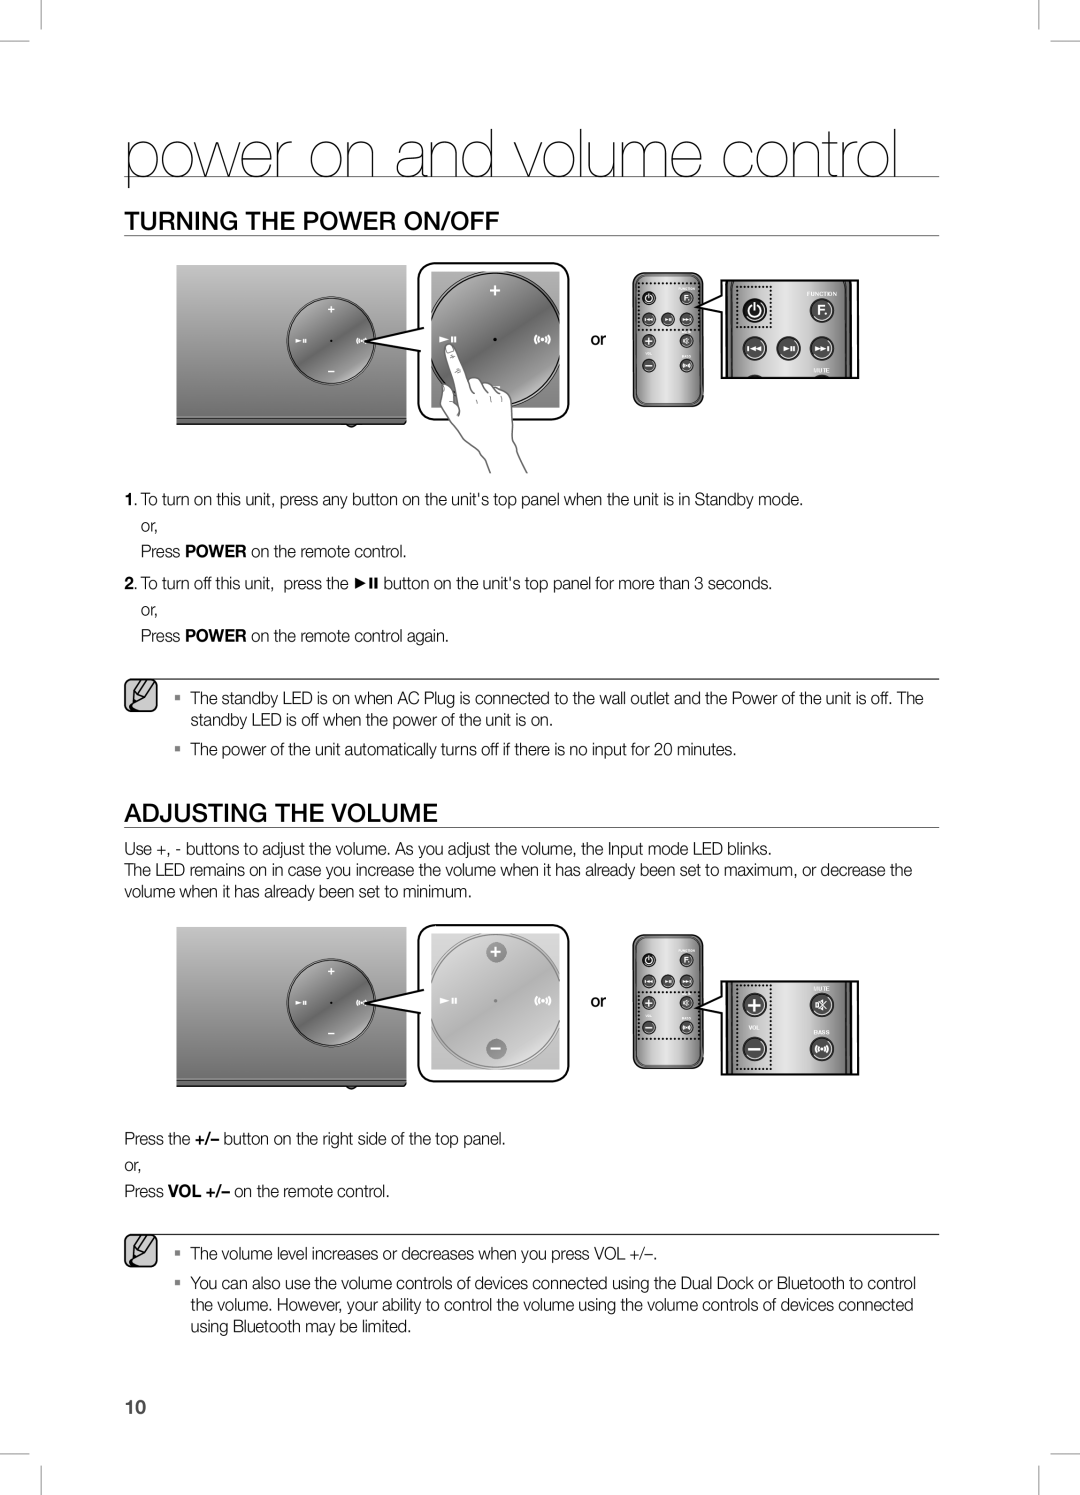 Samsung DA-E570 user manual power on and volume control, tUrning the PoWer on/off, adJUsting the VoLUMe 